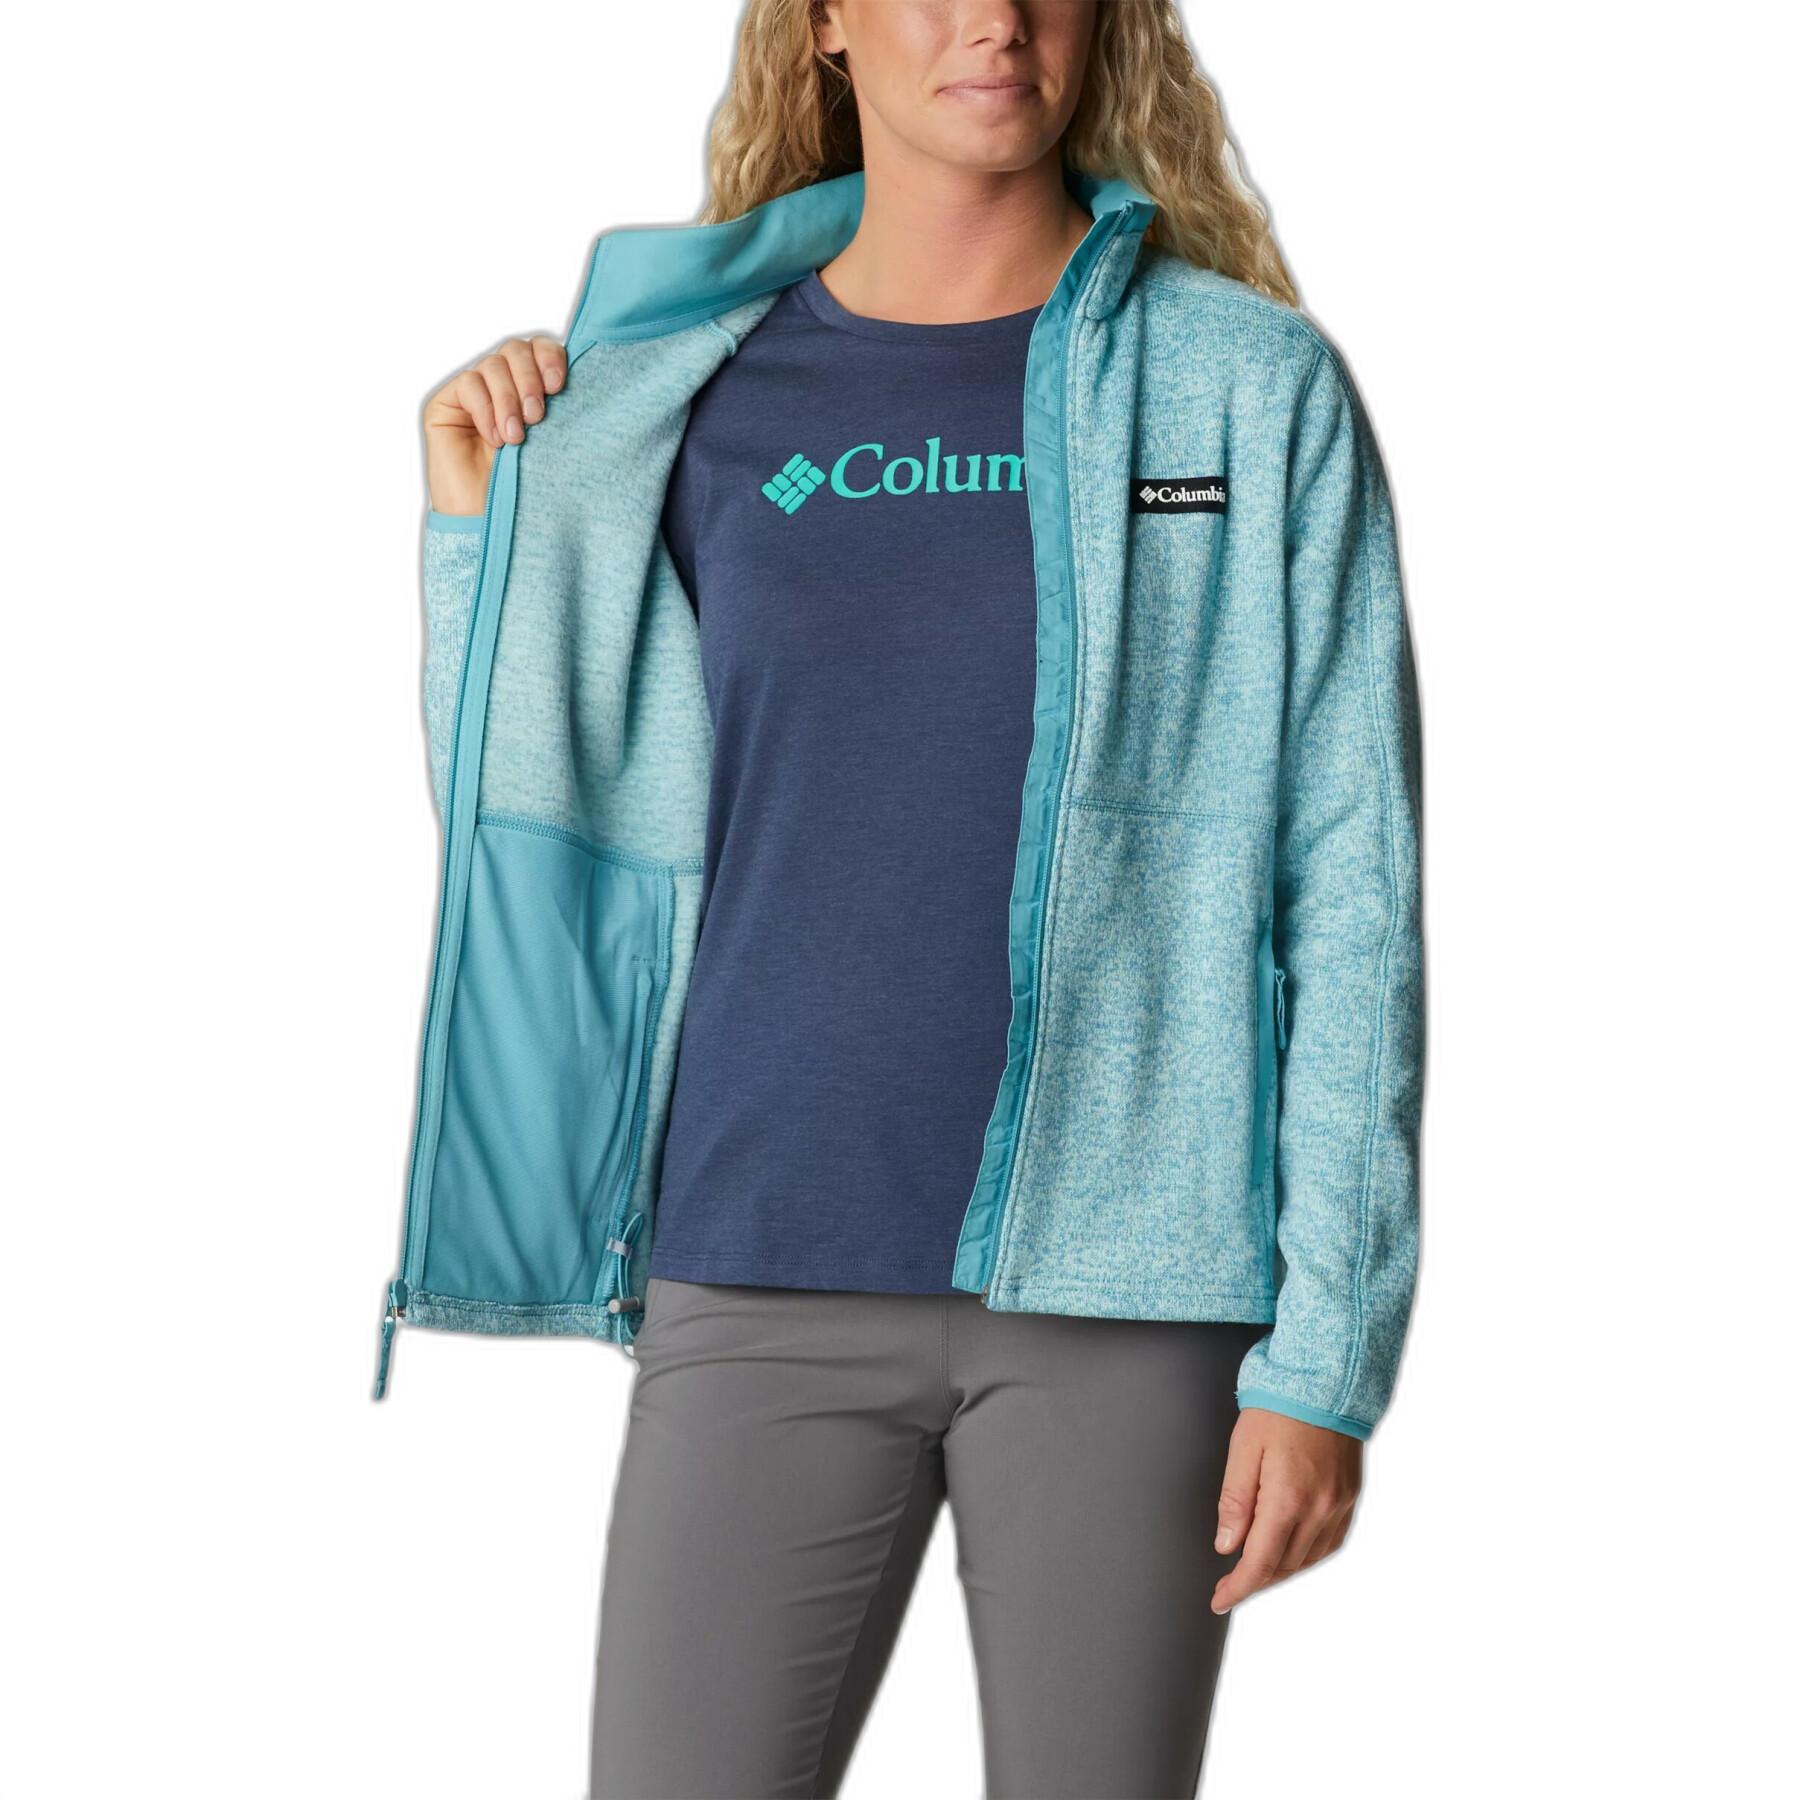 Camisola com zíper completo para mulheres Columbia Sweater Weather